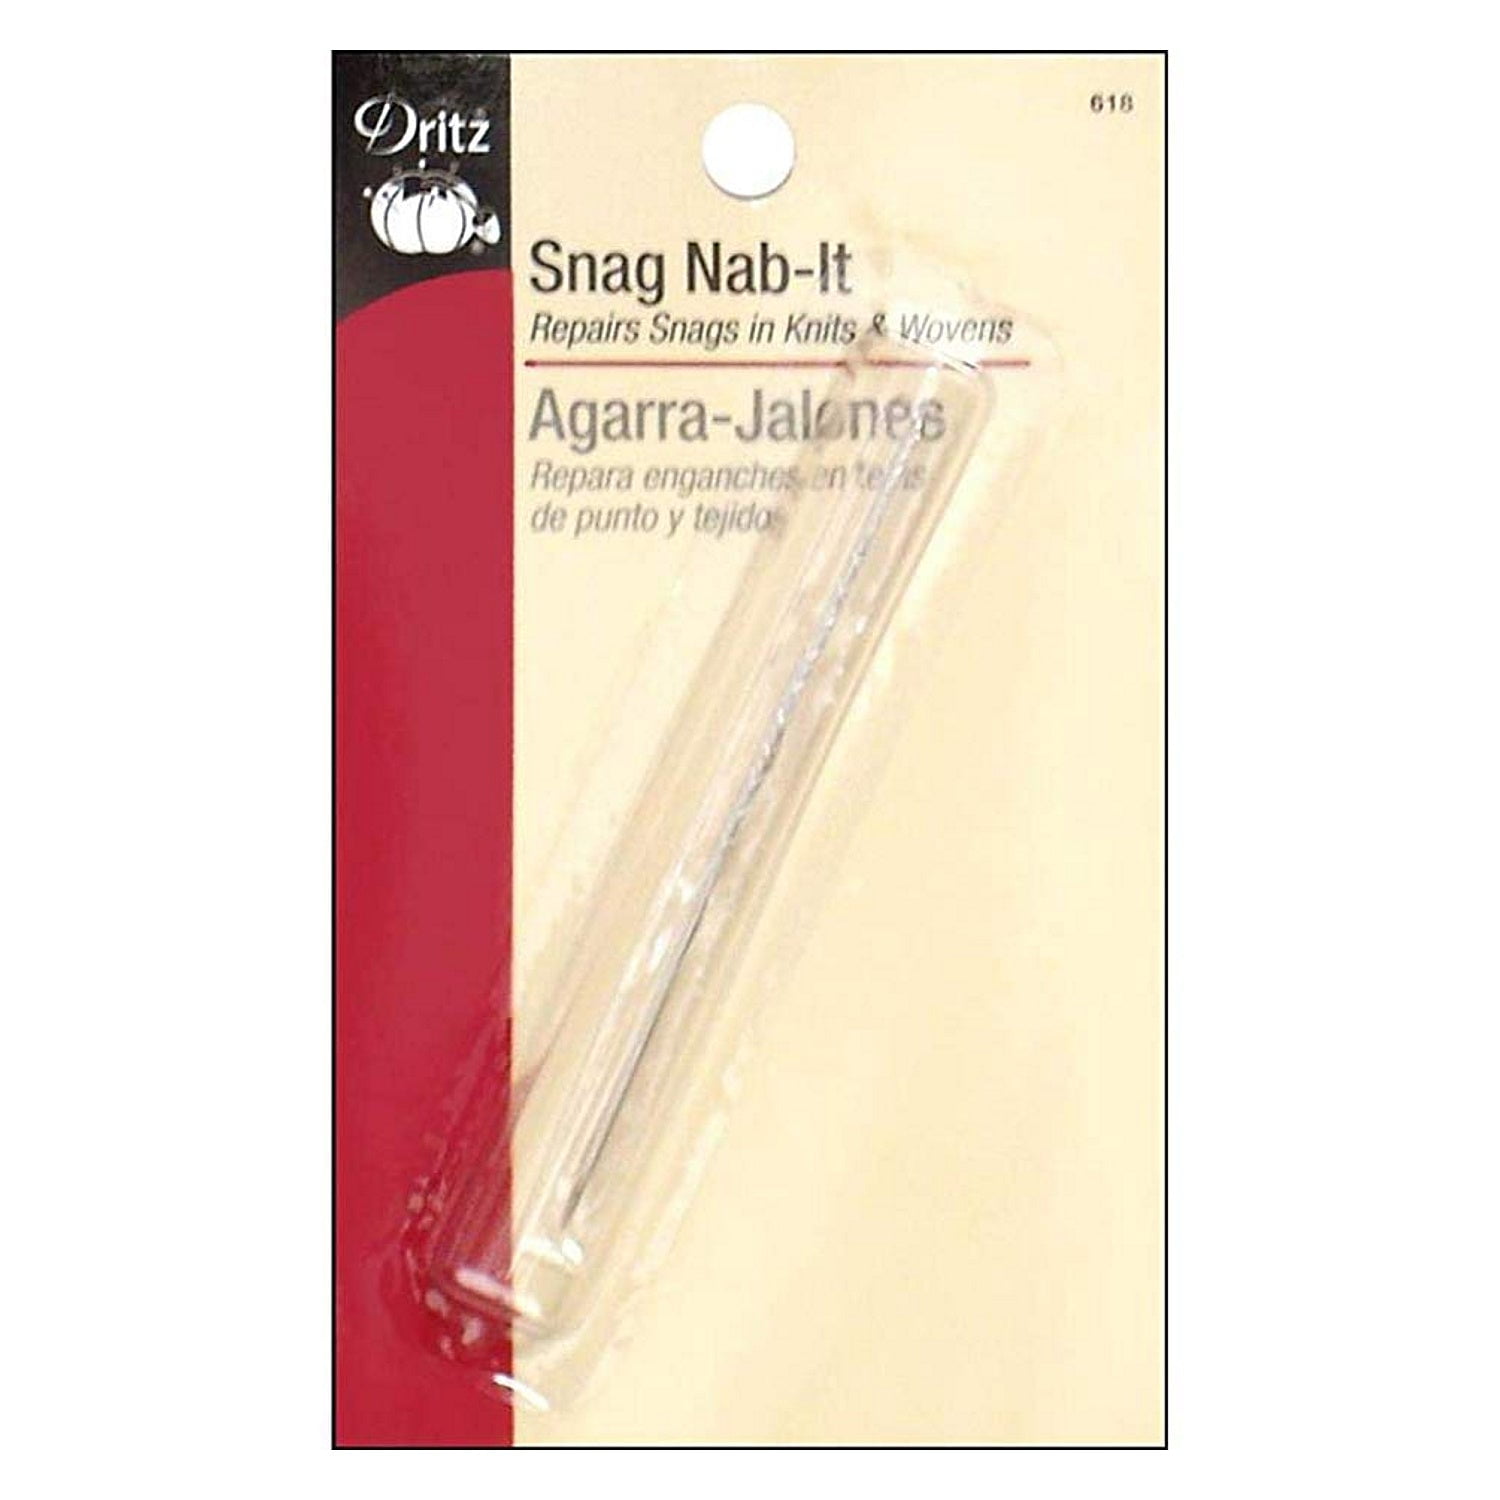 Snag Nab It Dritz Tool by Dritz. (Get 1 pack or 2!) Use to fix